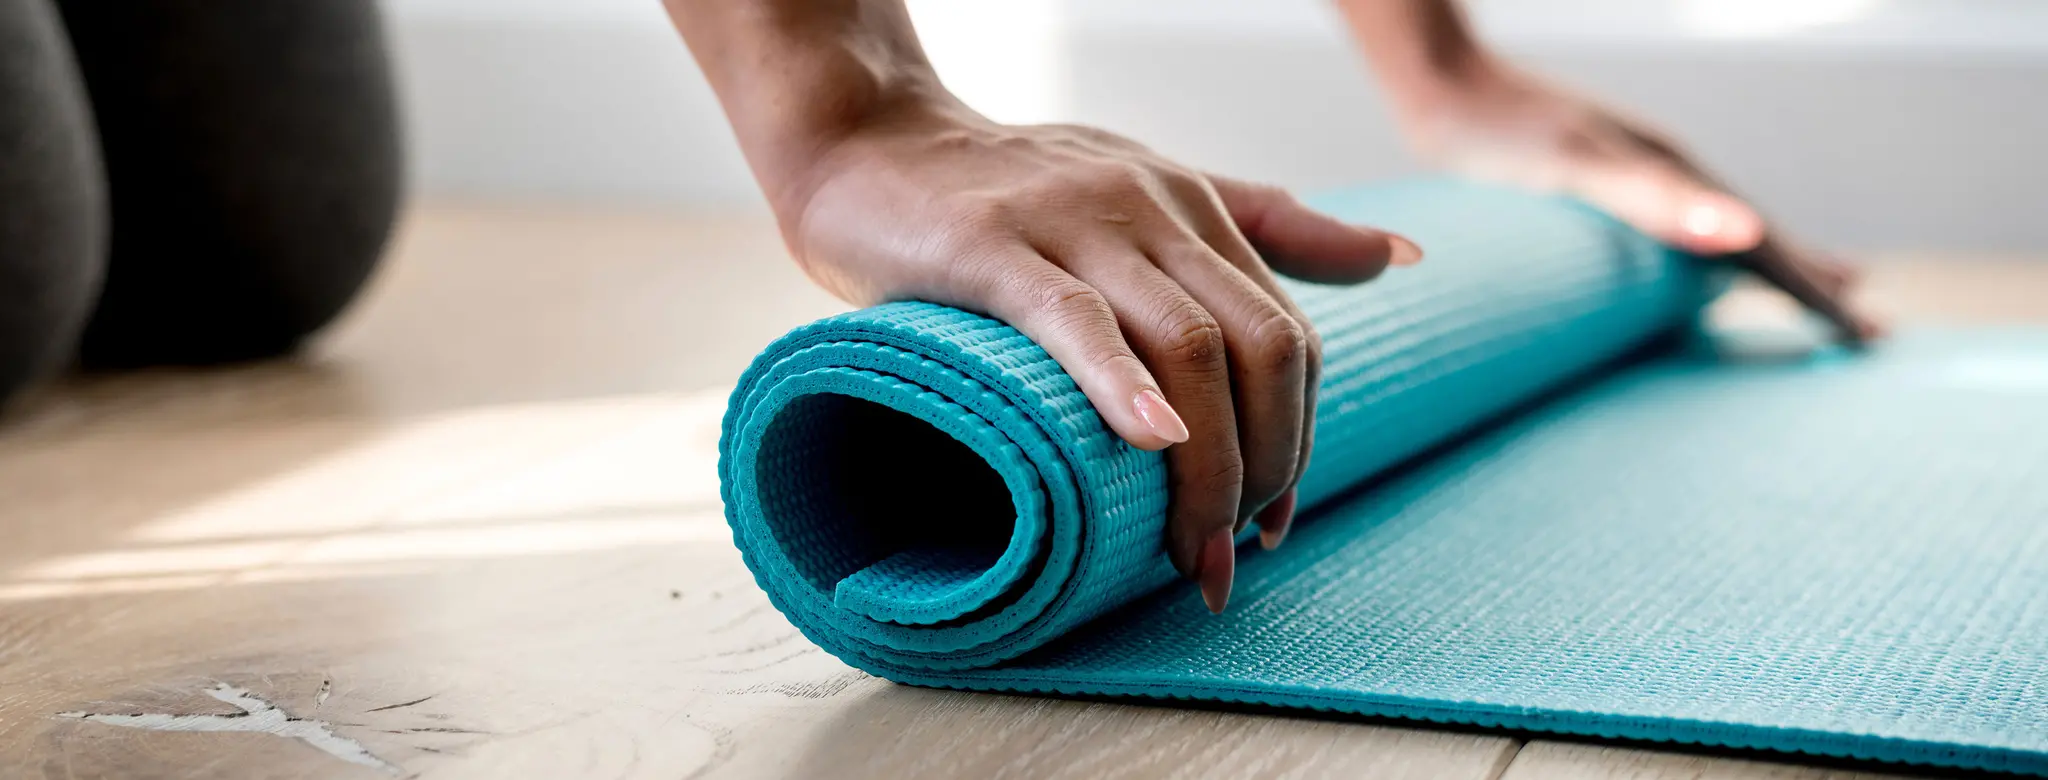 Woman rolling out a yoga mat